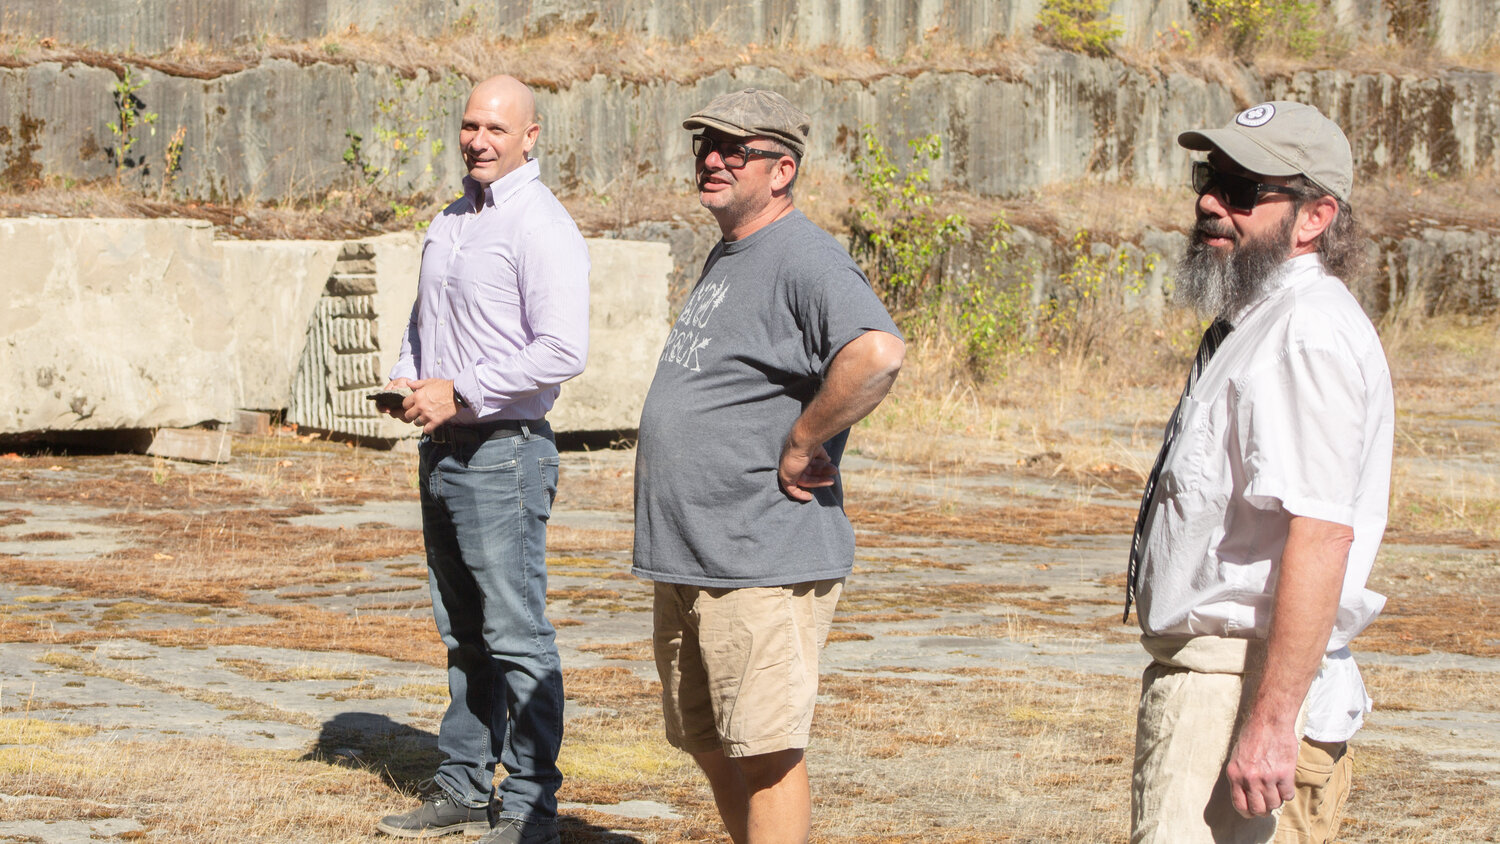 Rep. Peter Abbarno, left, stands next to Dan Miller and Bill Lenker in the old Hercules Quarry in Tenino on Friday.